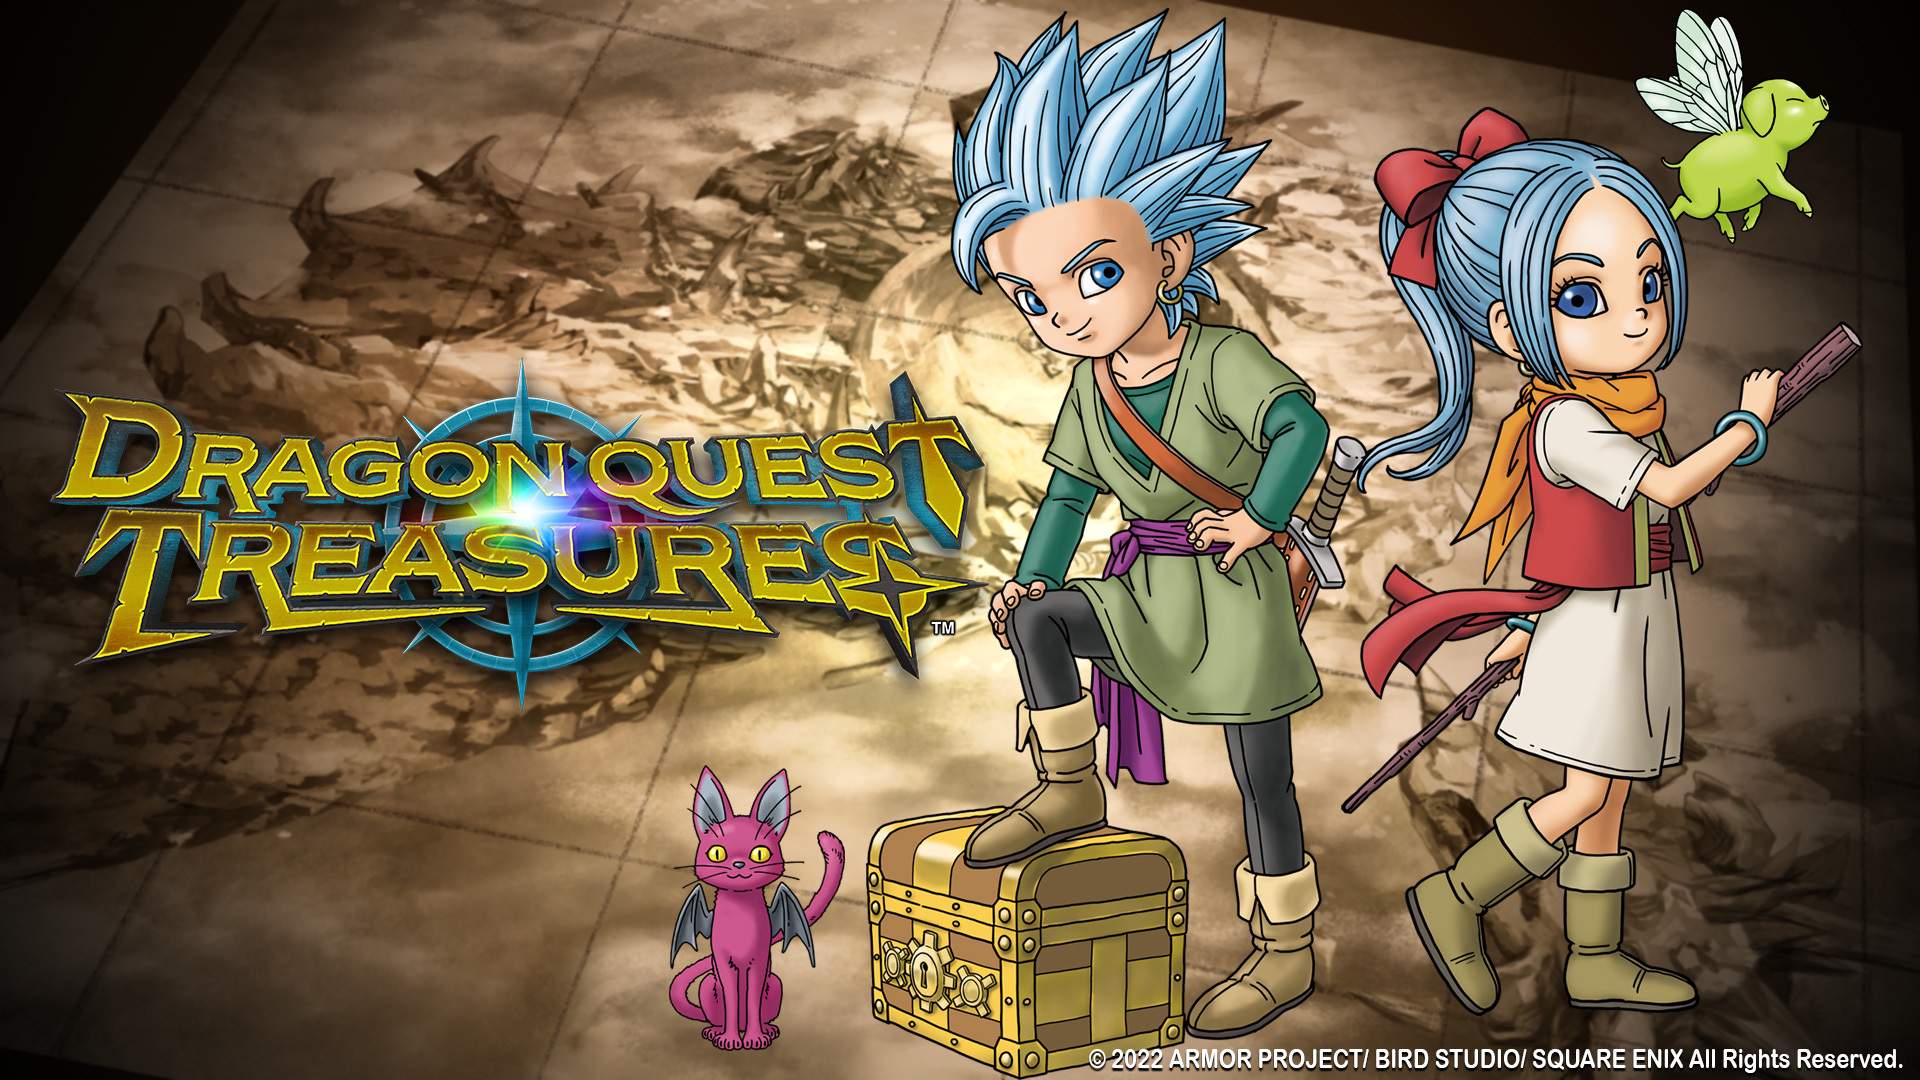 Dragon Quest 12 confirmed in the most obscure way possible